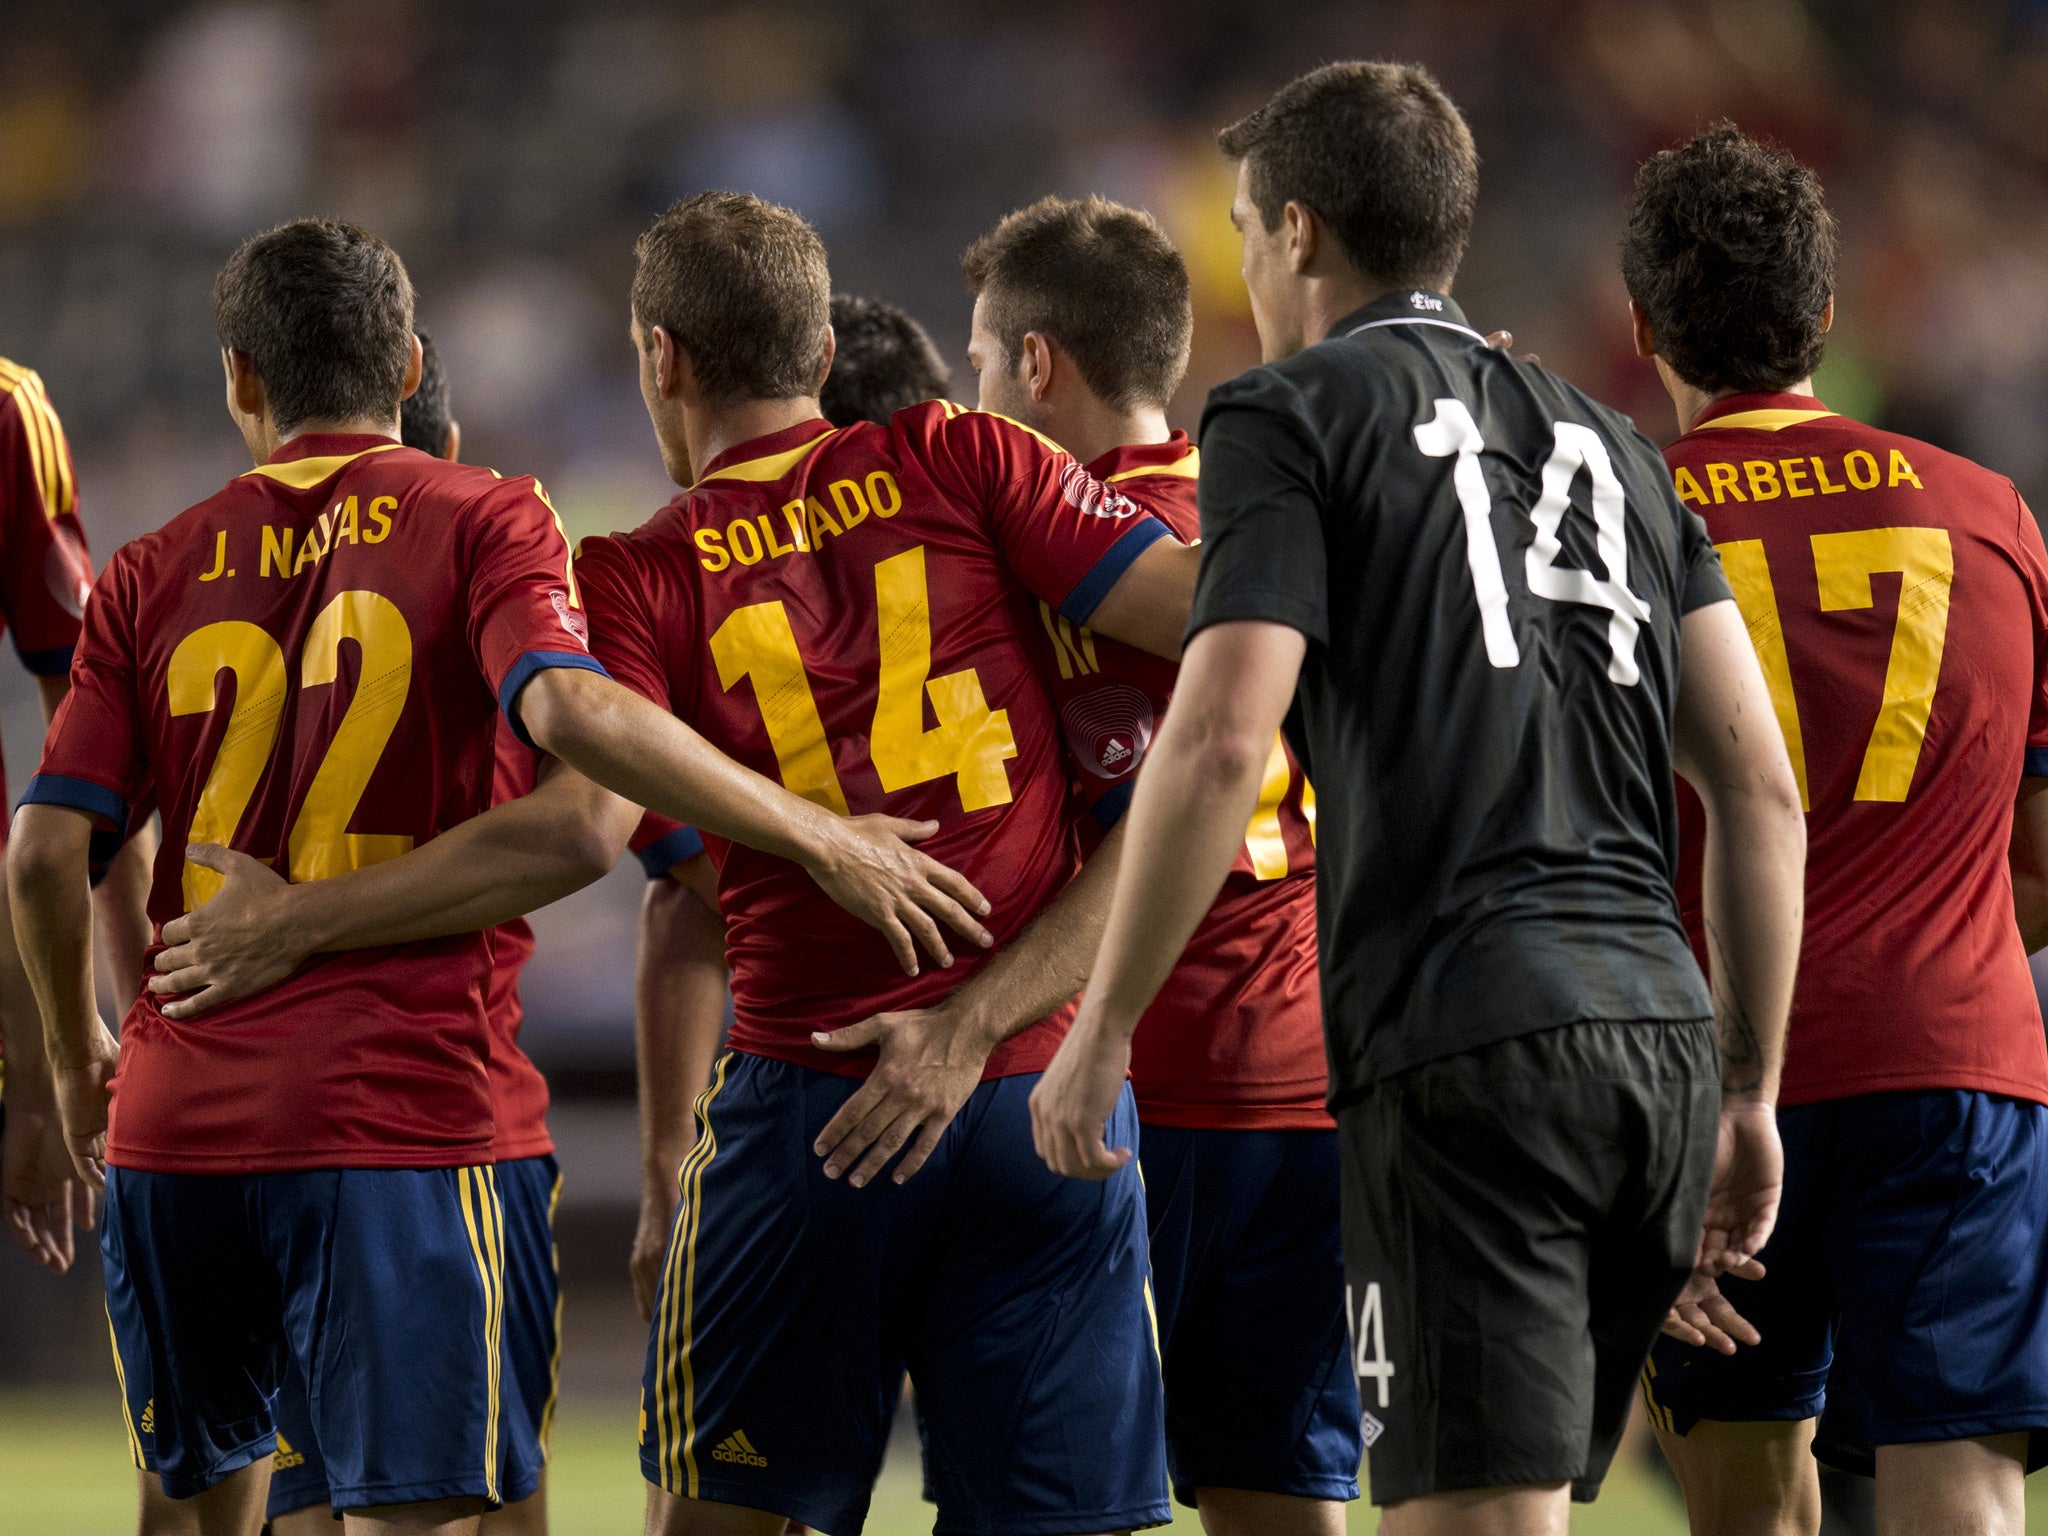 Spain's Roberto Soldado (14) is congratulated by teammates after scoring against Ireland during their friendly match June 11, 2013 at Yankee Stadium in New York